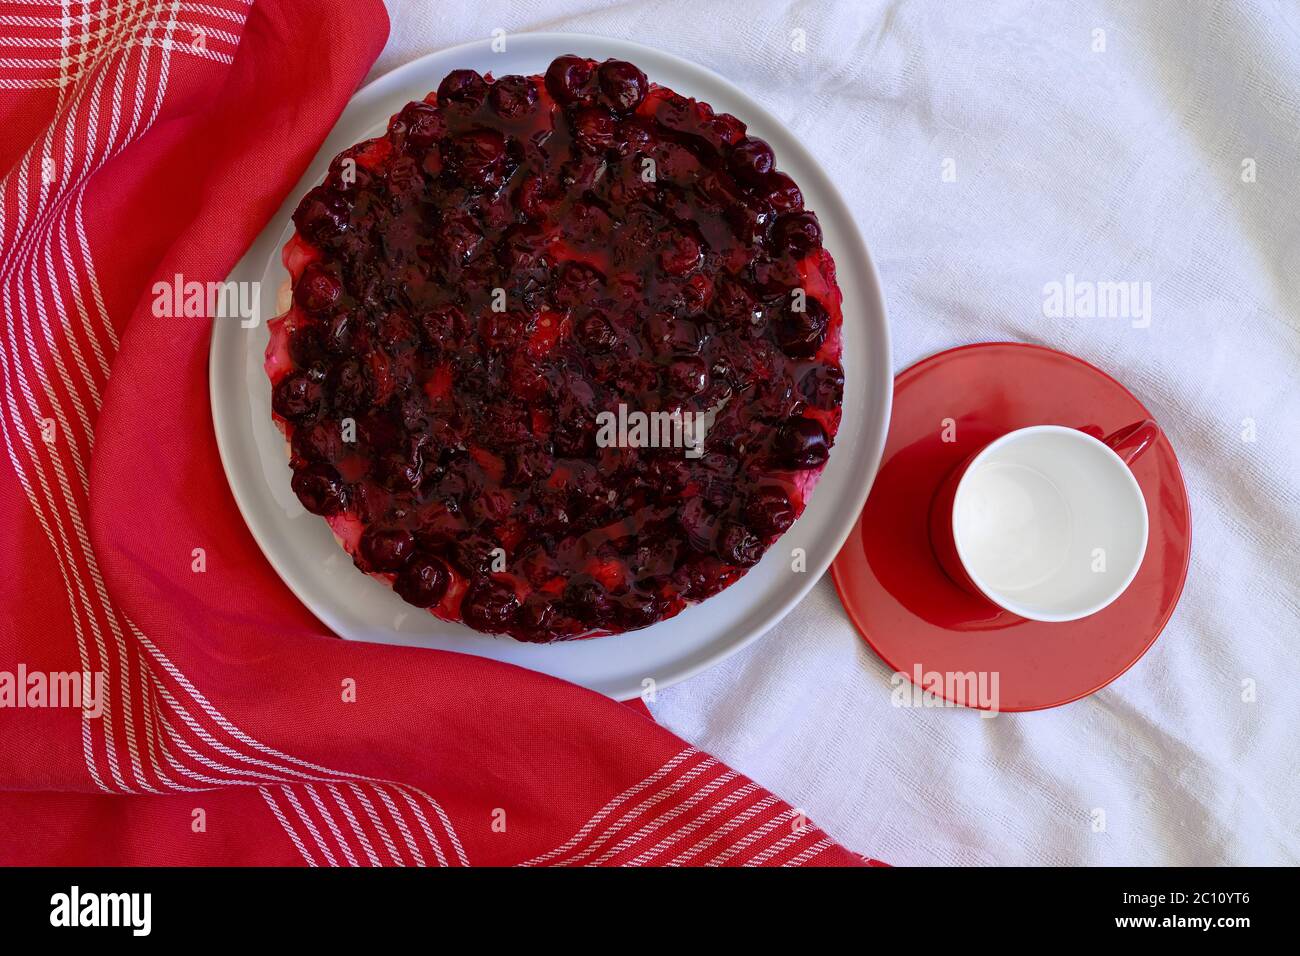 Homemade no baked cake with mascarpone cheese cream, fresh cherries and jelly  on a white plate,  red small plate and empty cup Stock Photo